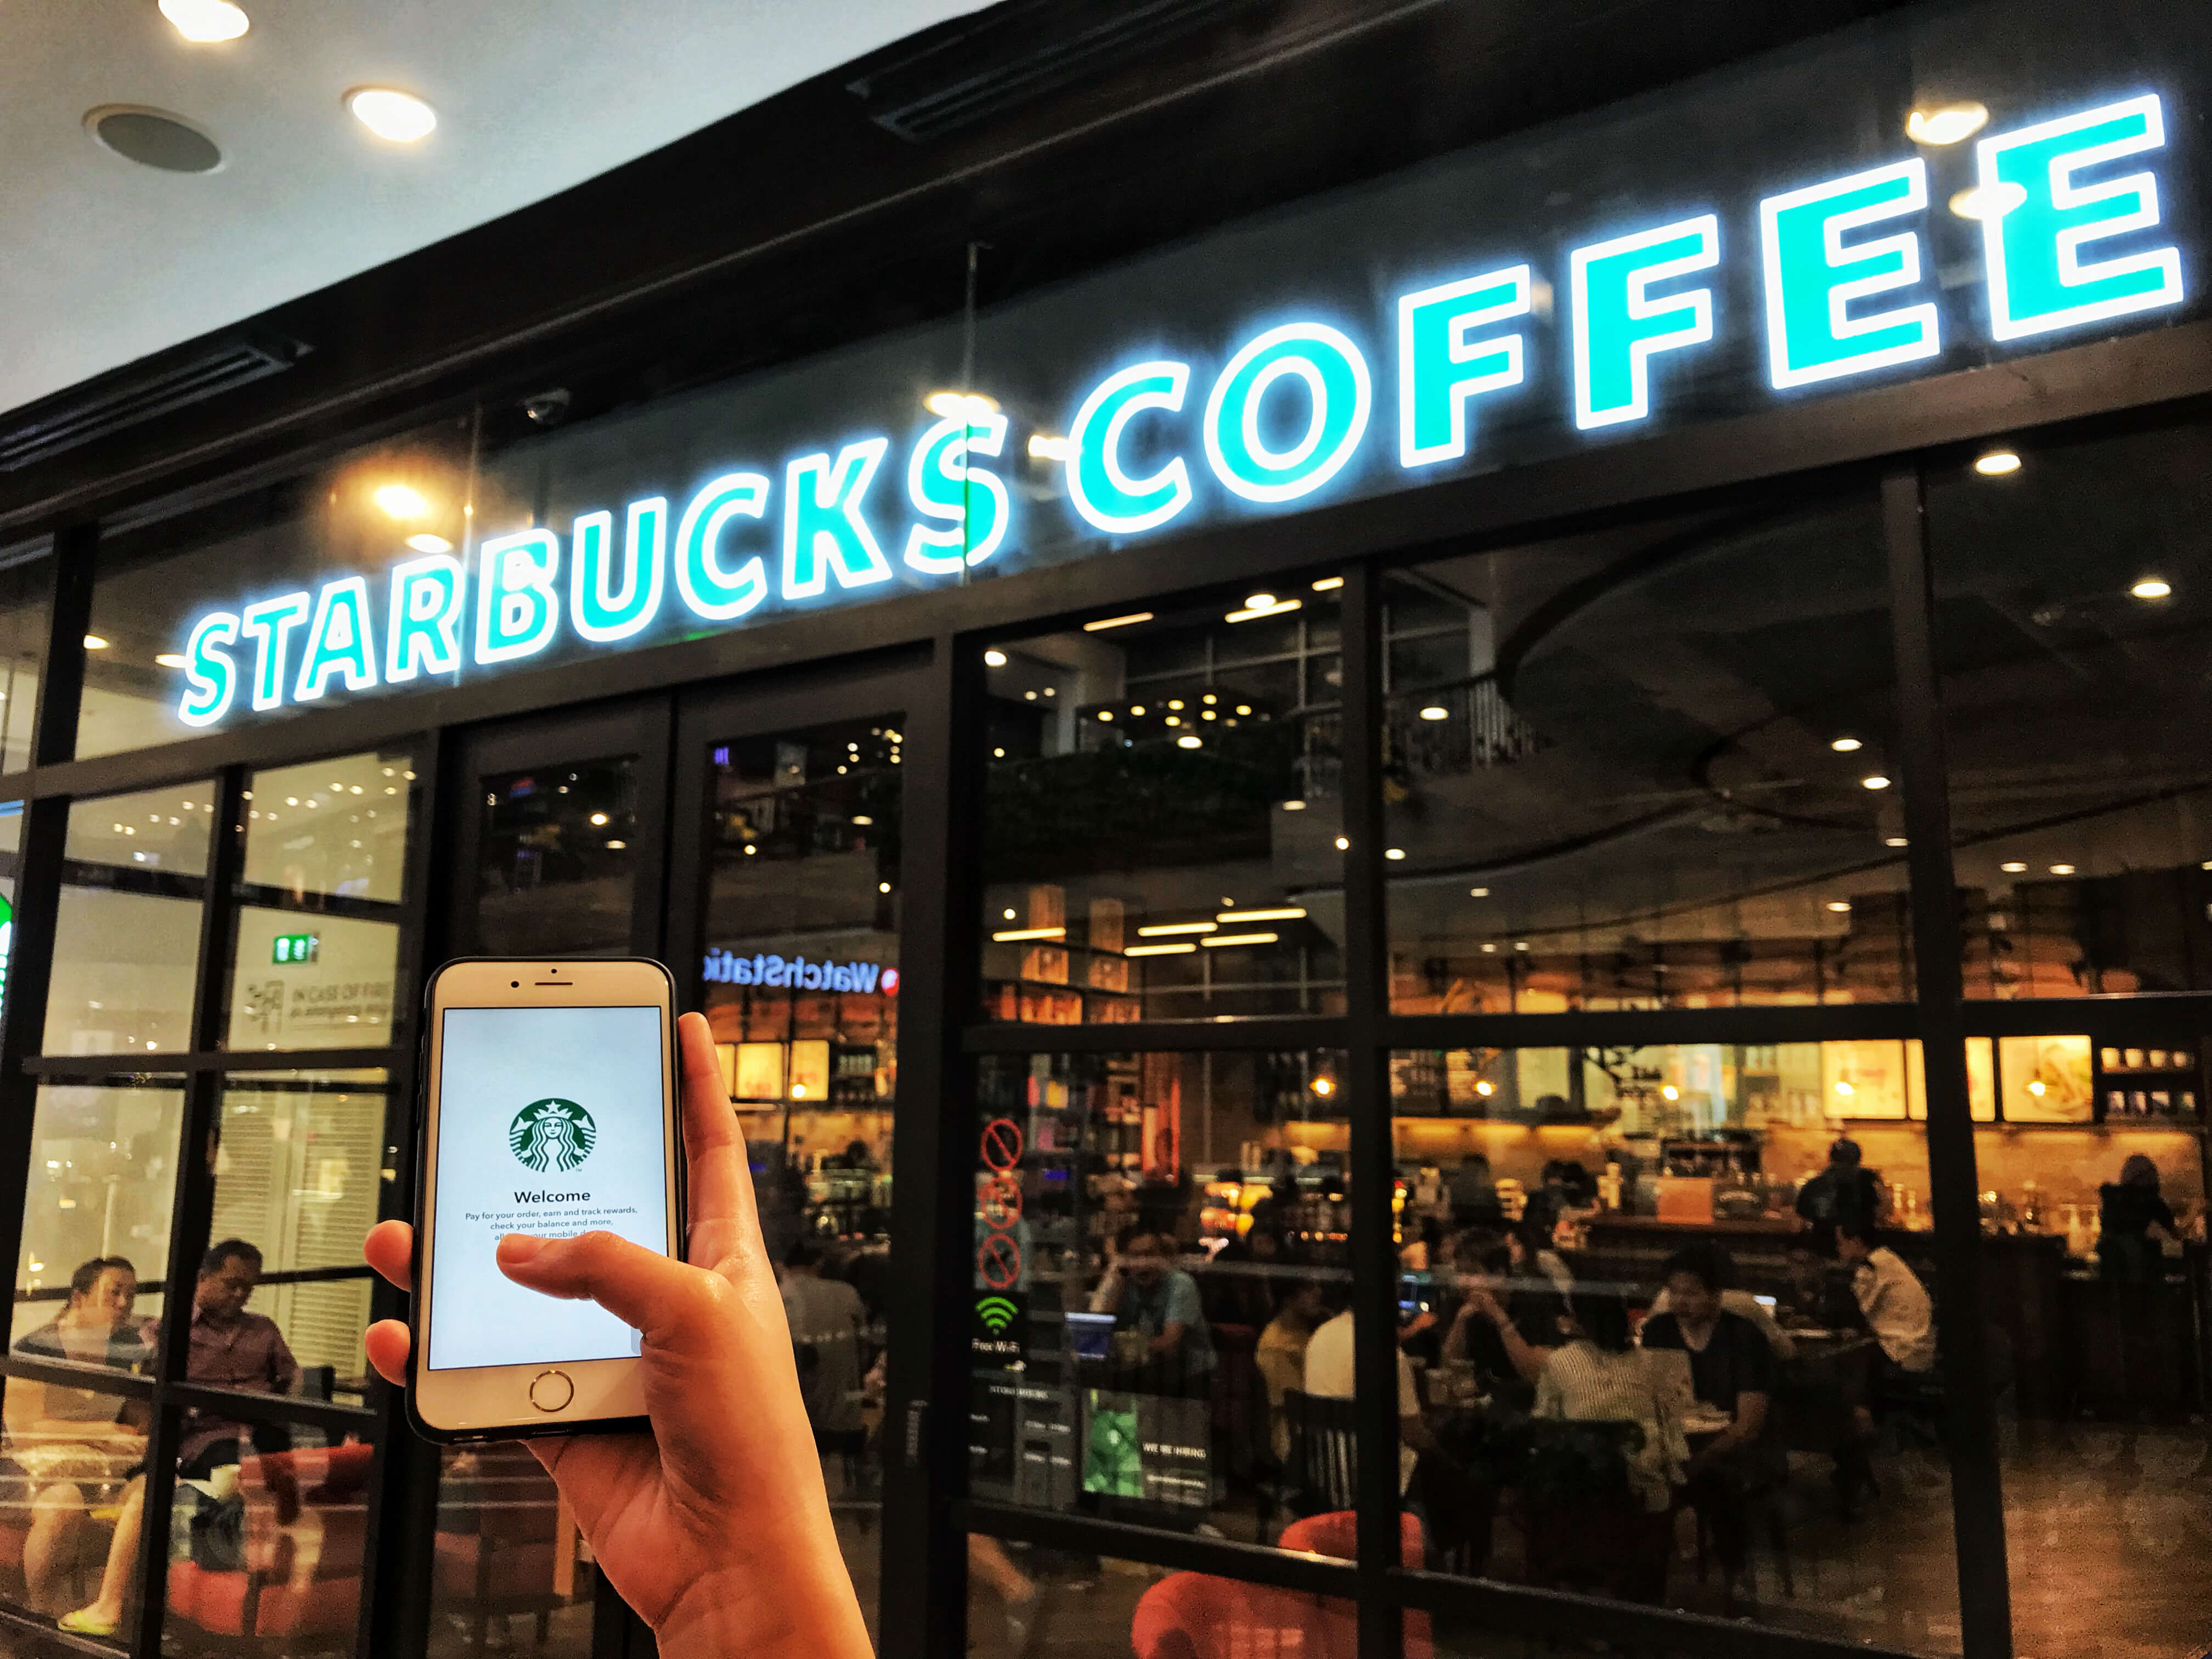 the Starbucks app will have 25.2 million users this year